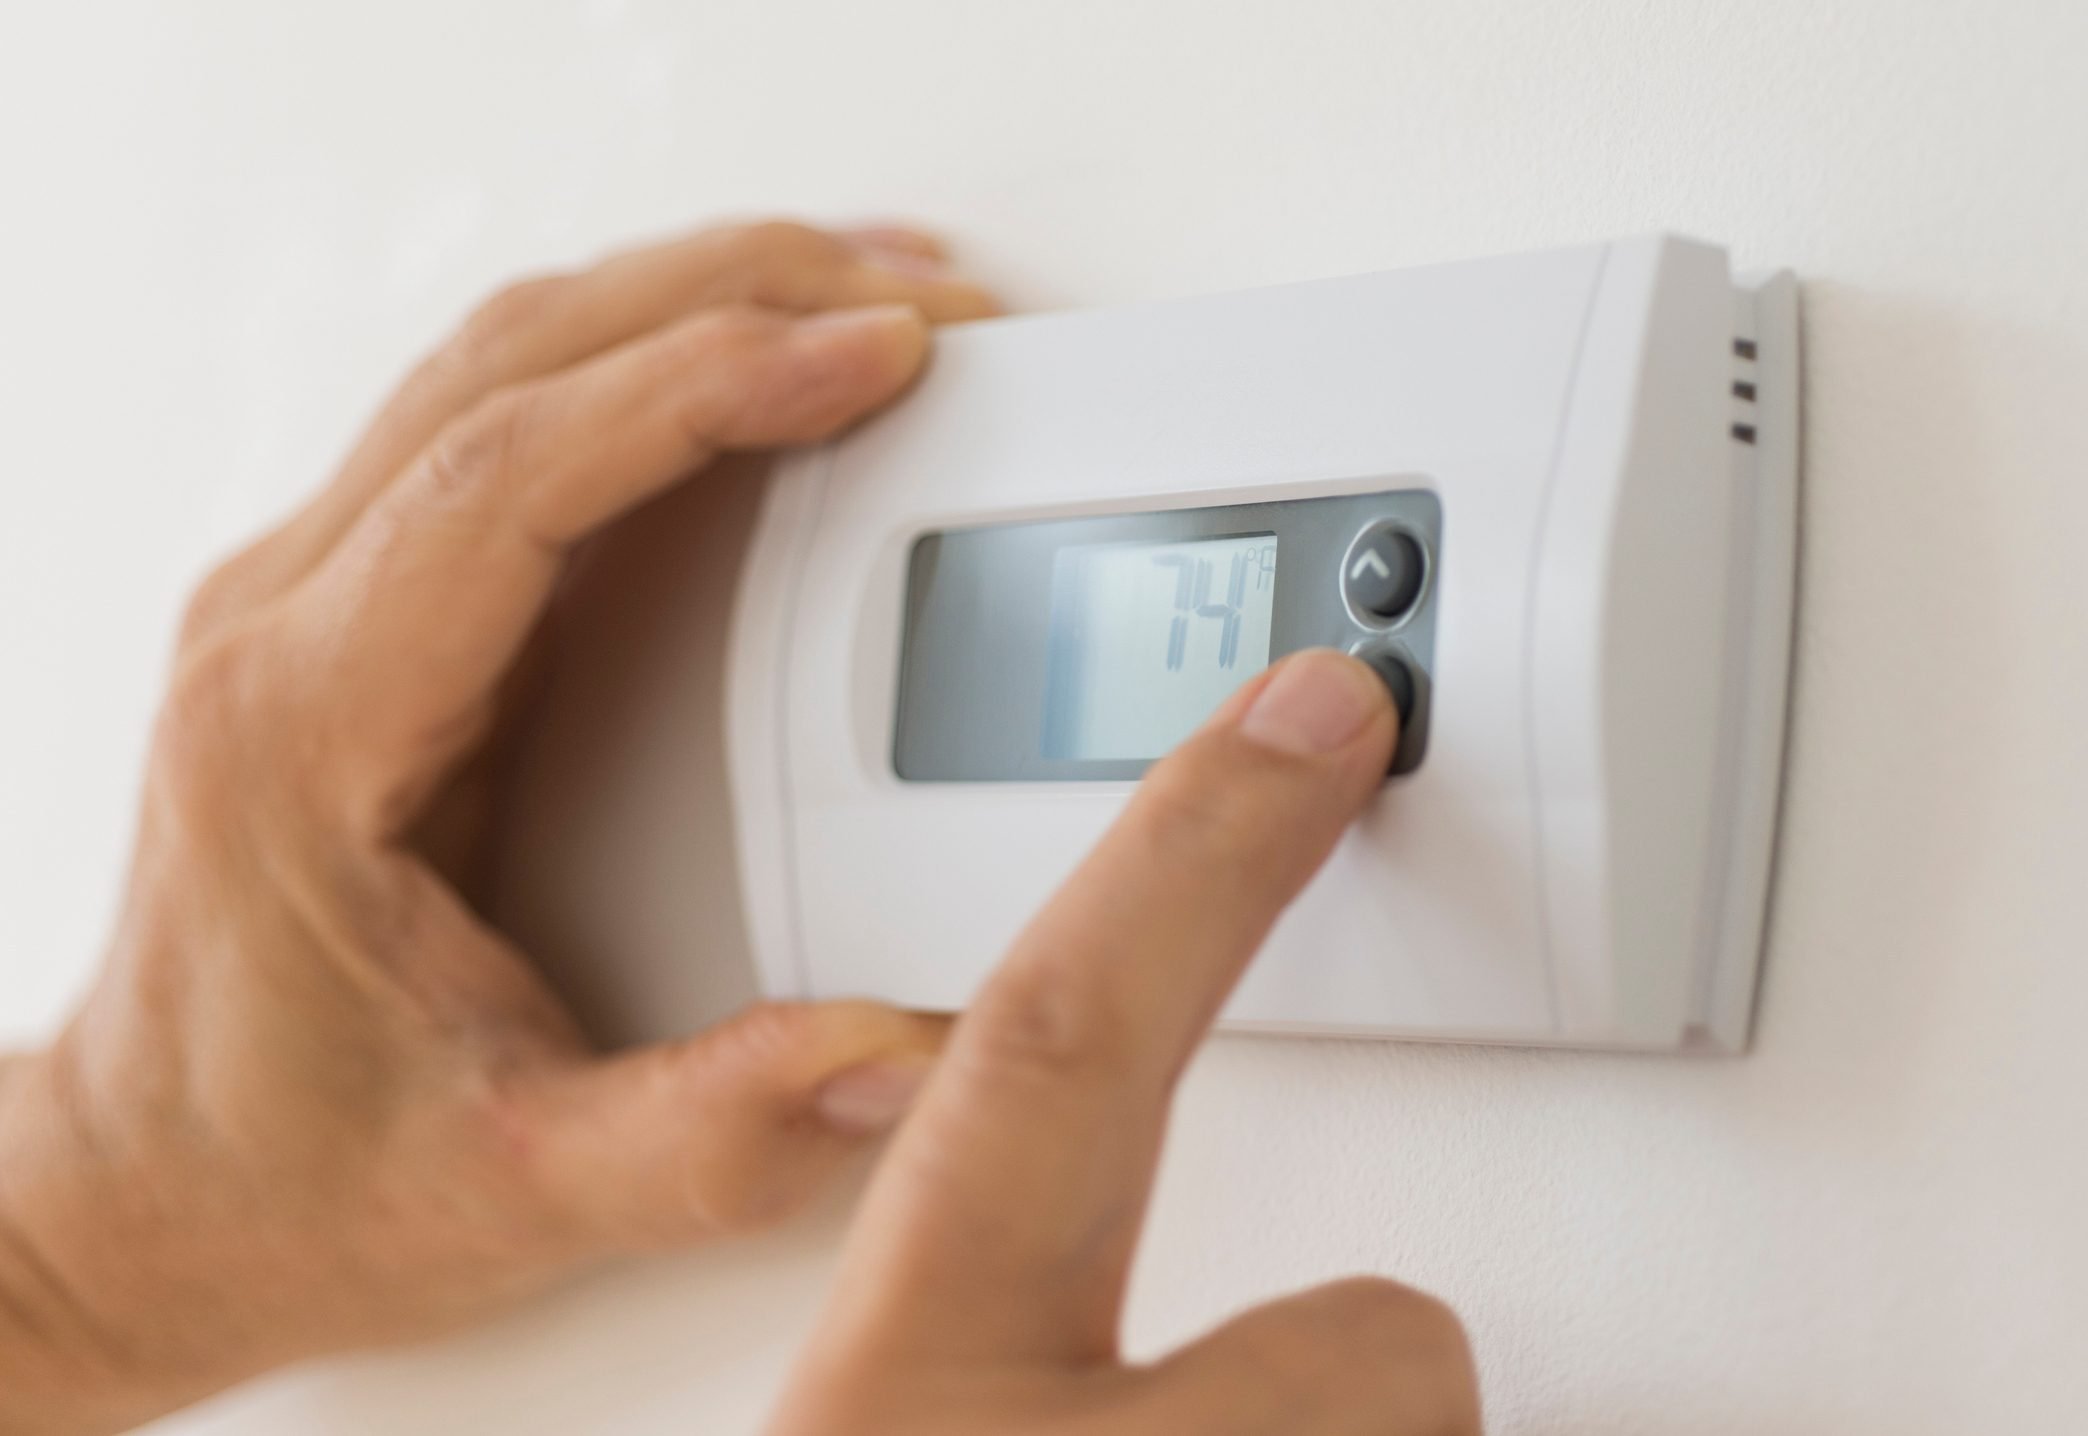 Experts: This Simple Thermostat Tweak Could Help Prevent New COVID Variant Infection